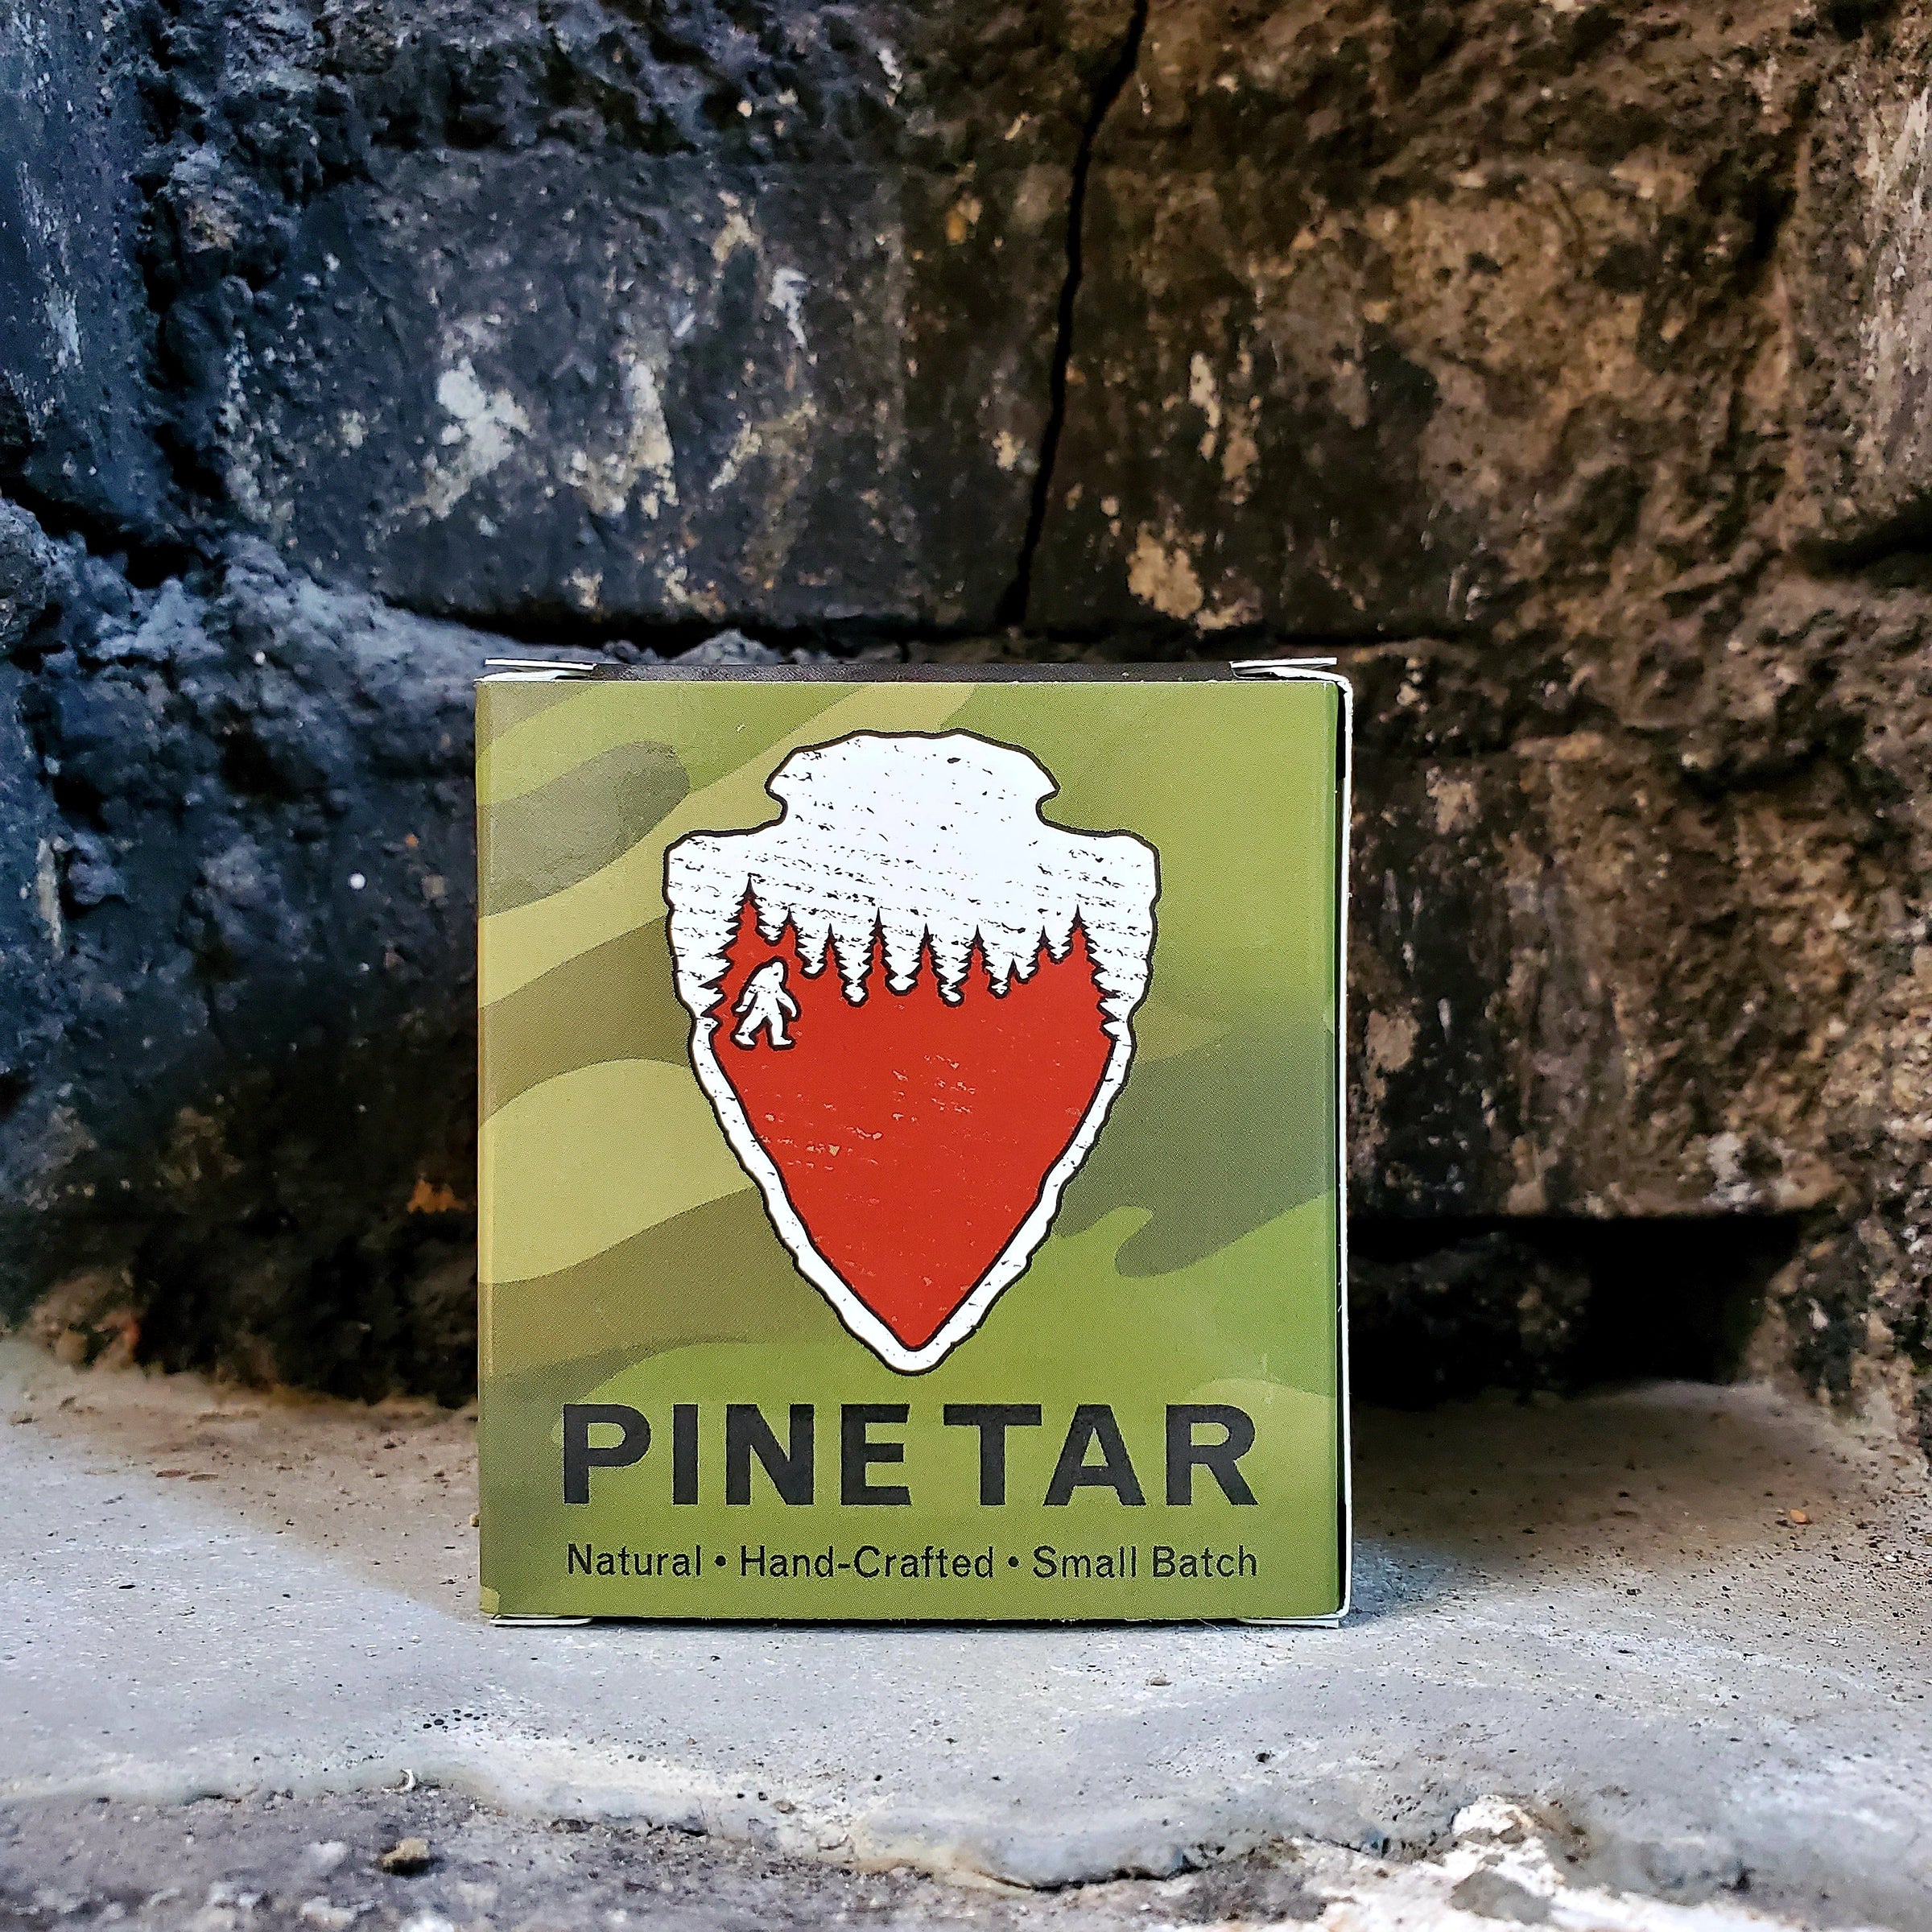 Pine Tar natural men's soap by Patriot and Company.  With 100% Pine Tar and Activated Charcoal. 